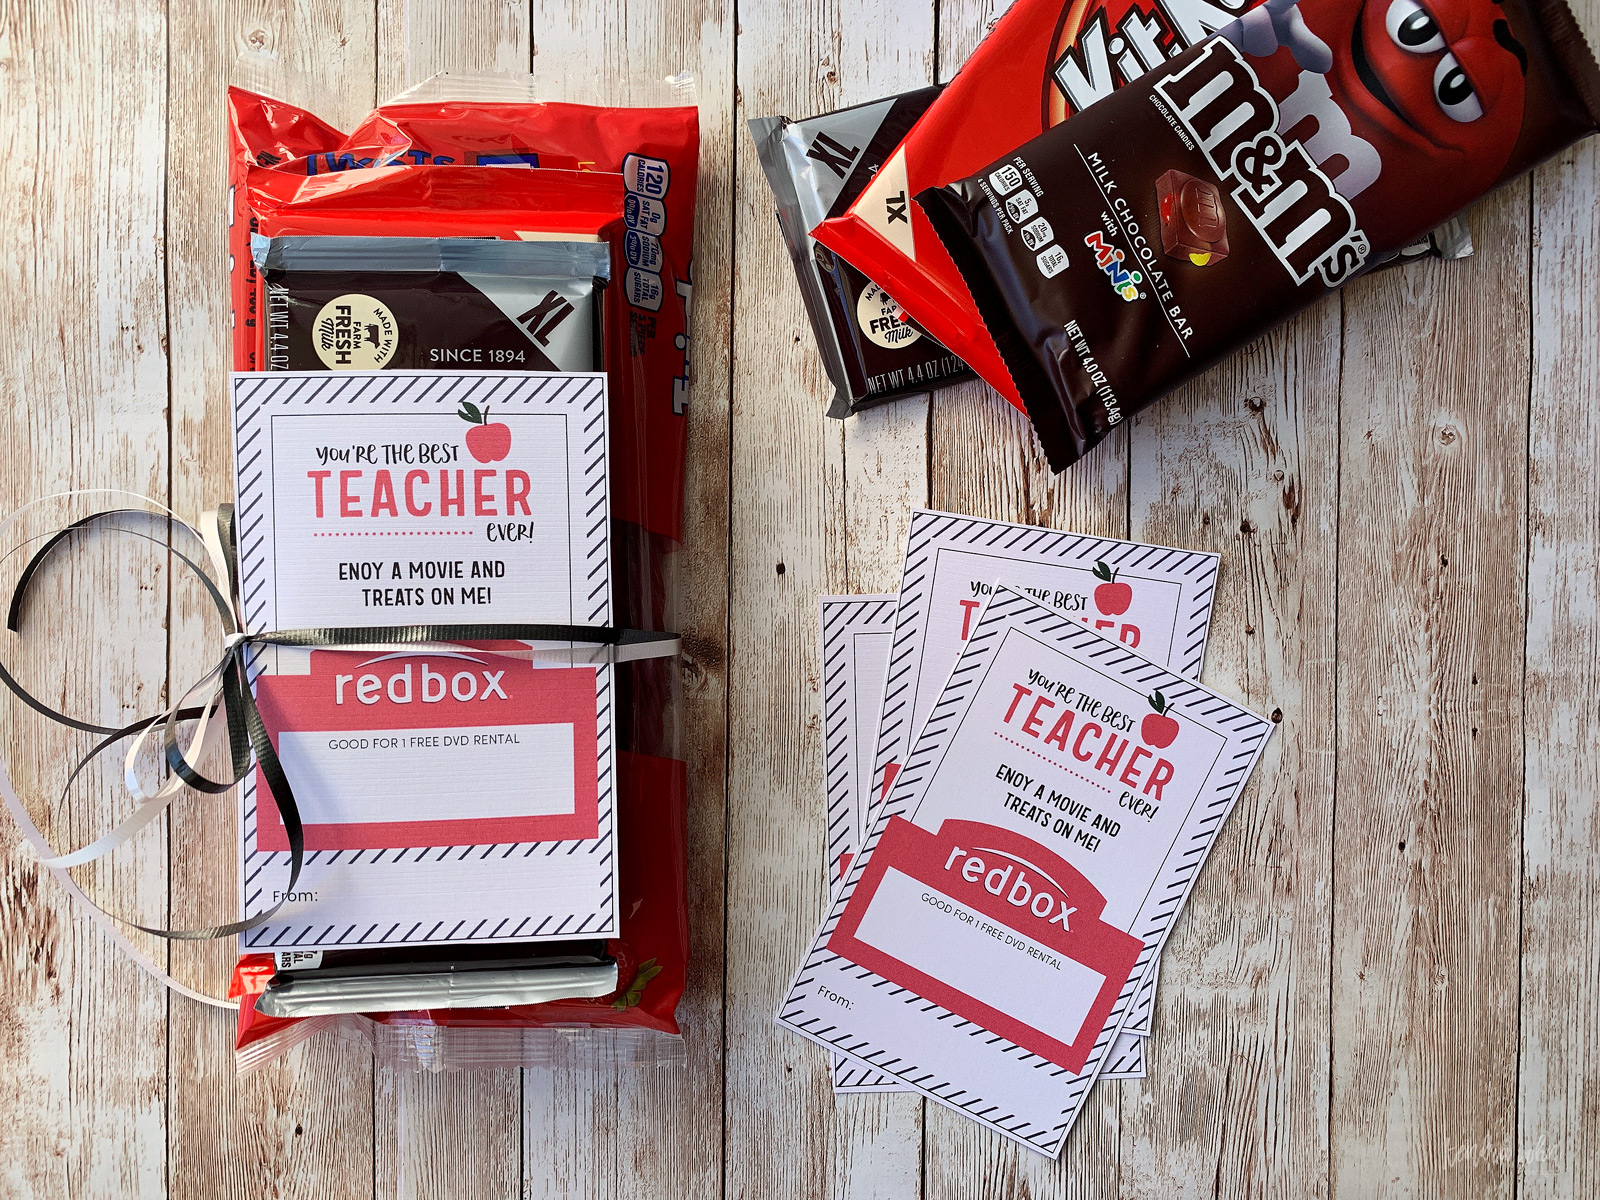 Gift for Teachers with Redbox Code and Treats
